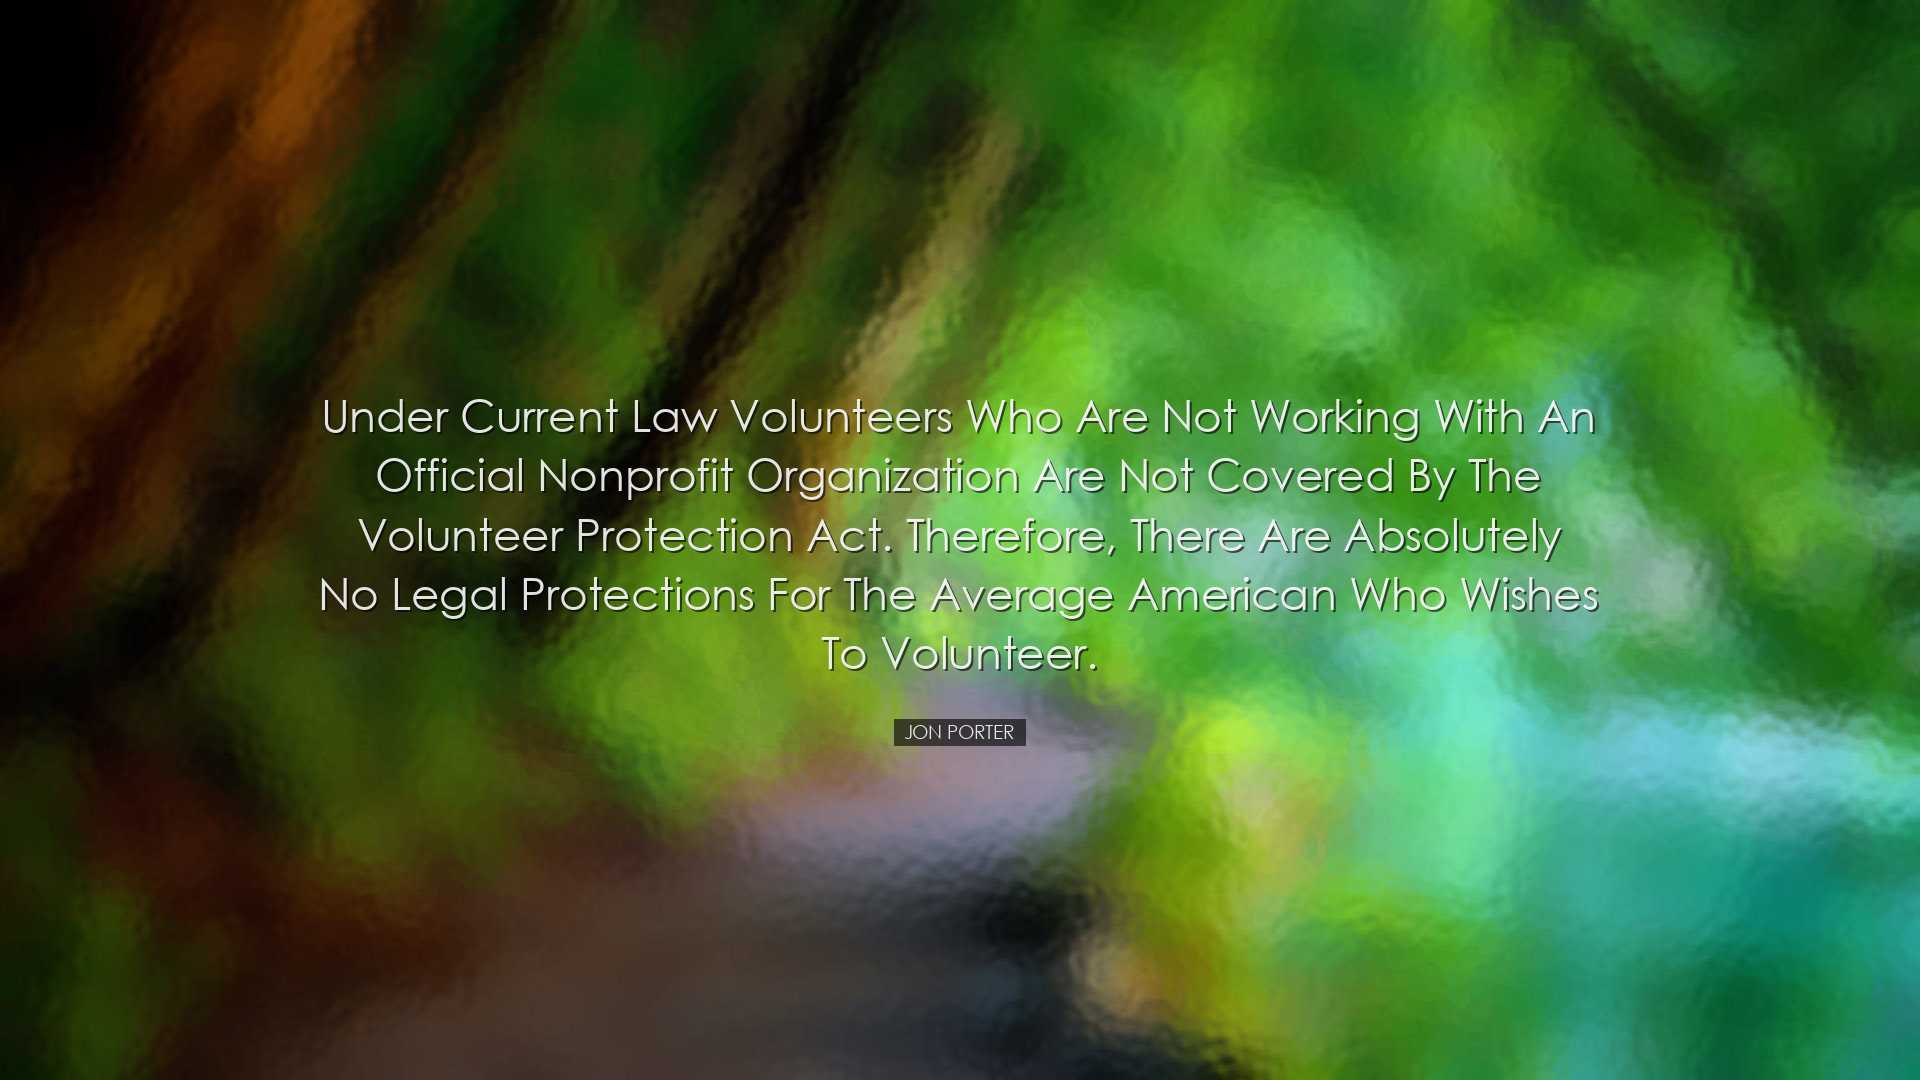 Under current law volunteers who are not working with an official